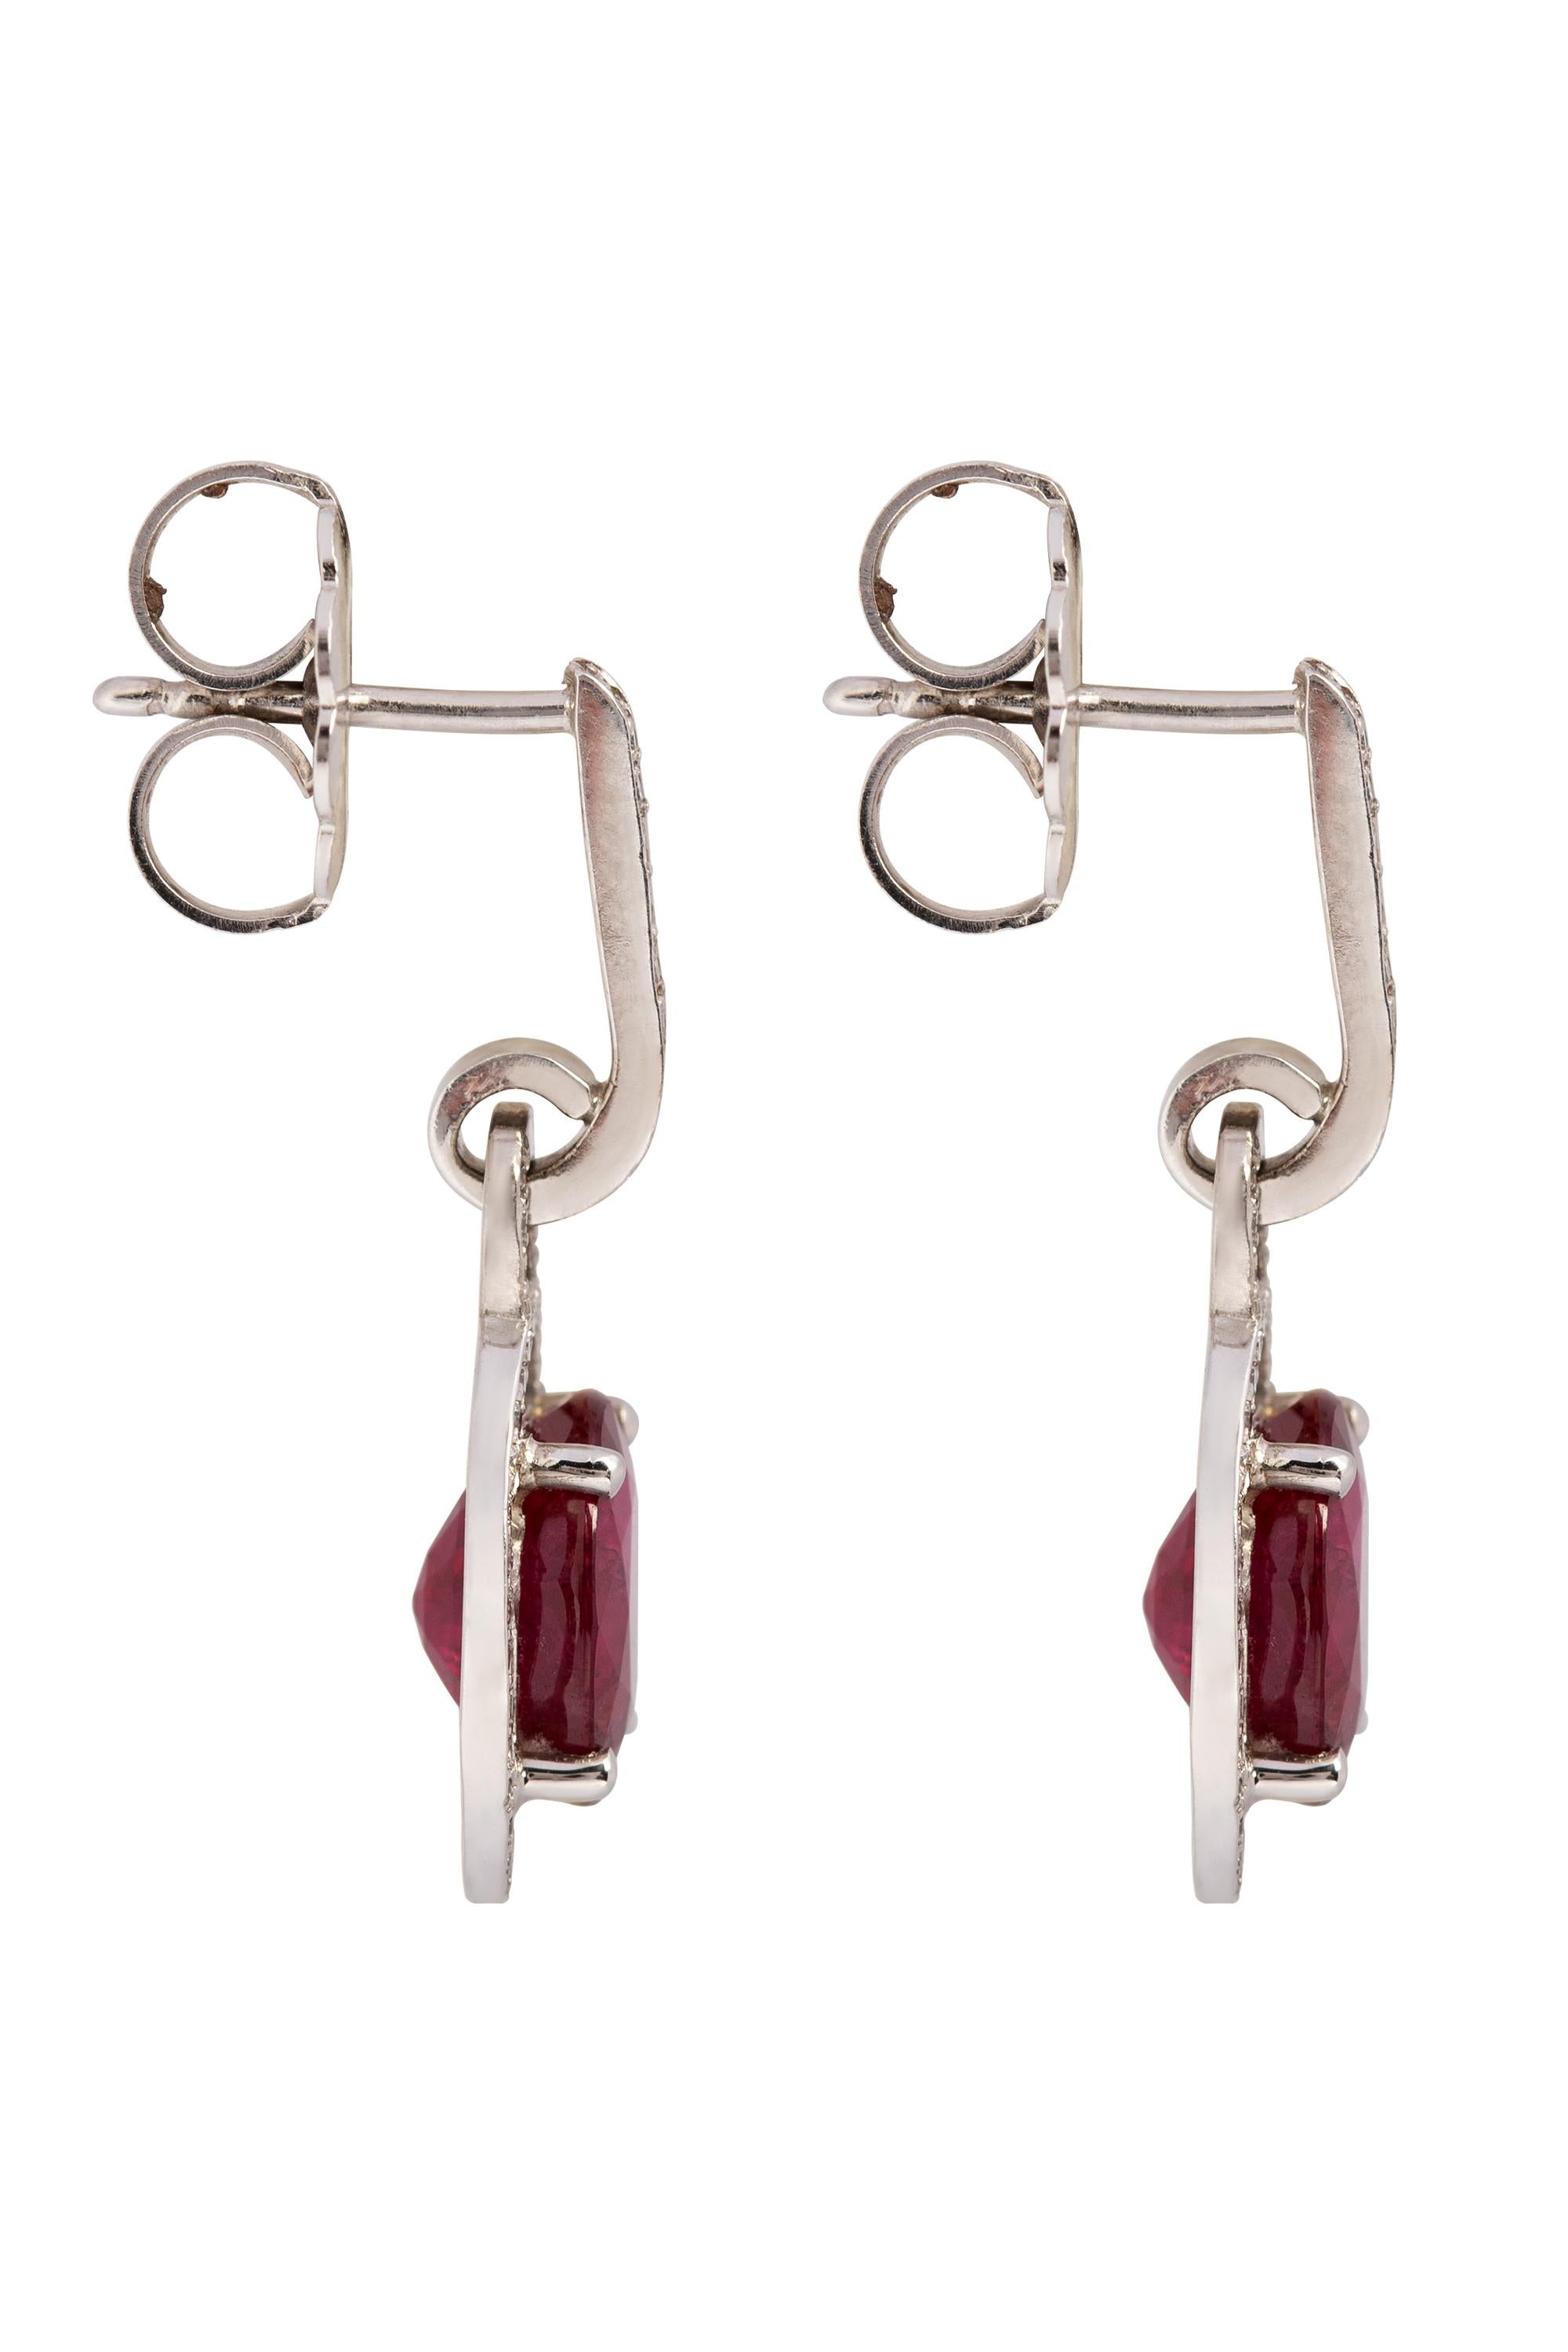 These refined and glamorous 1 inch drop earrings are composed of two deep red oval rubies weighing approximately 5 carats in total, radiating from within frames of glittering pave diamonds that dangle delicately from lines of more sparkling pave